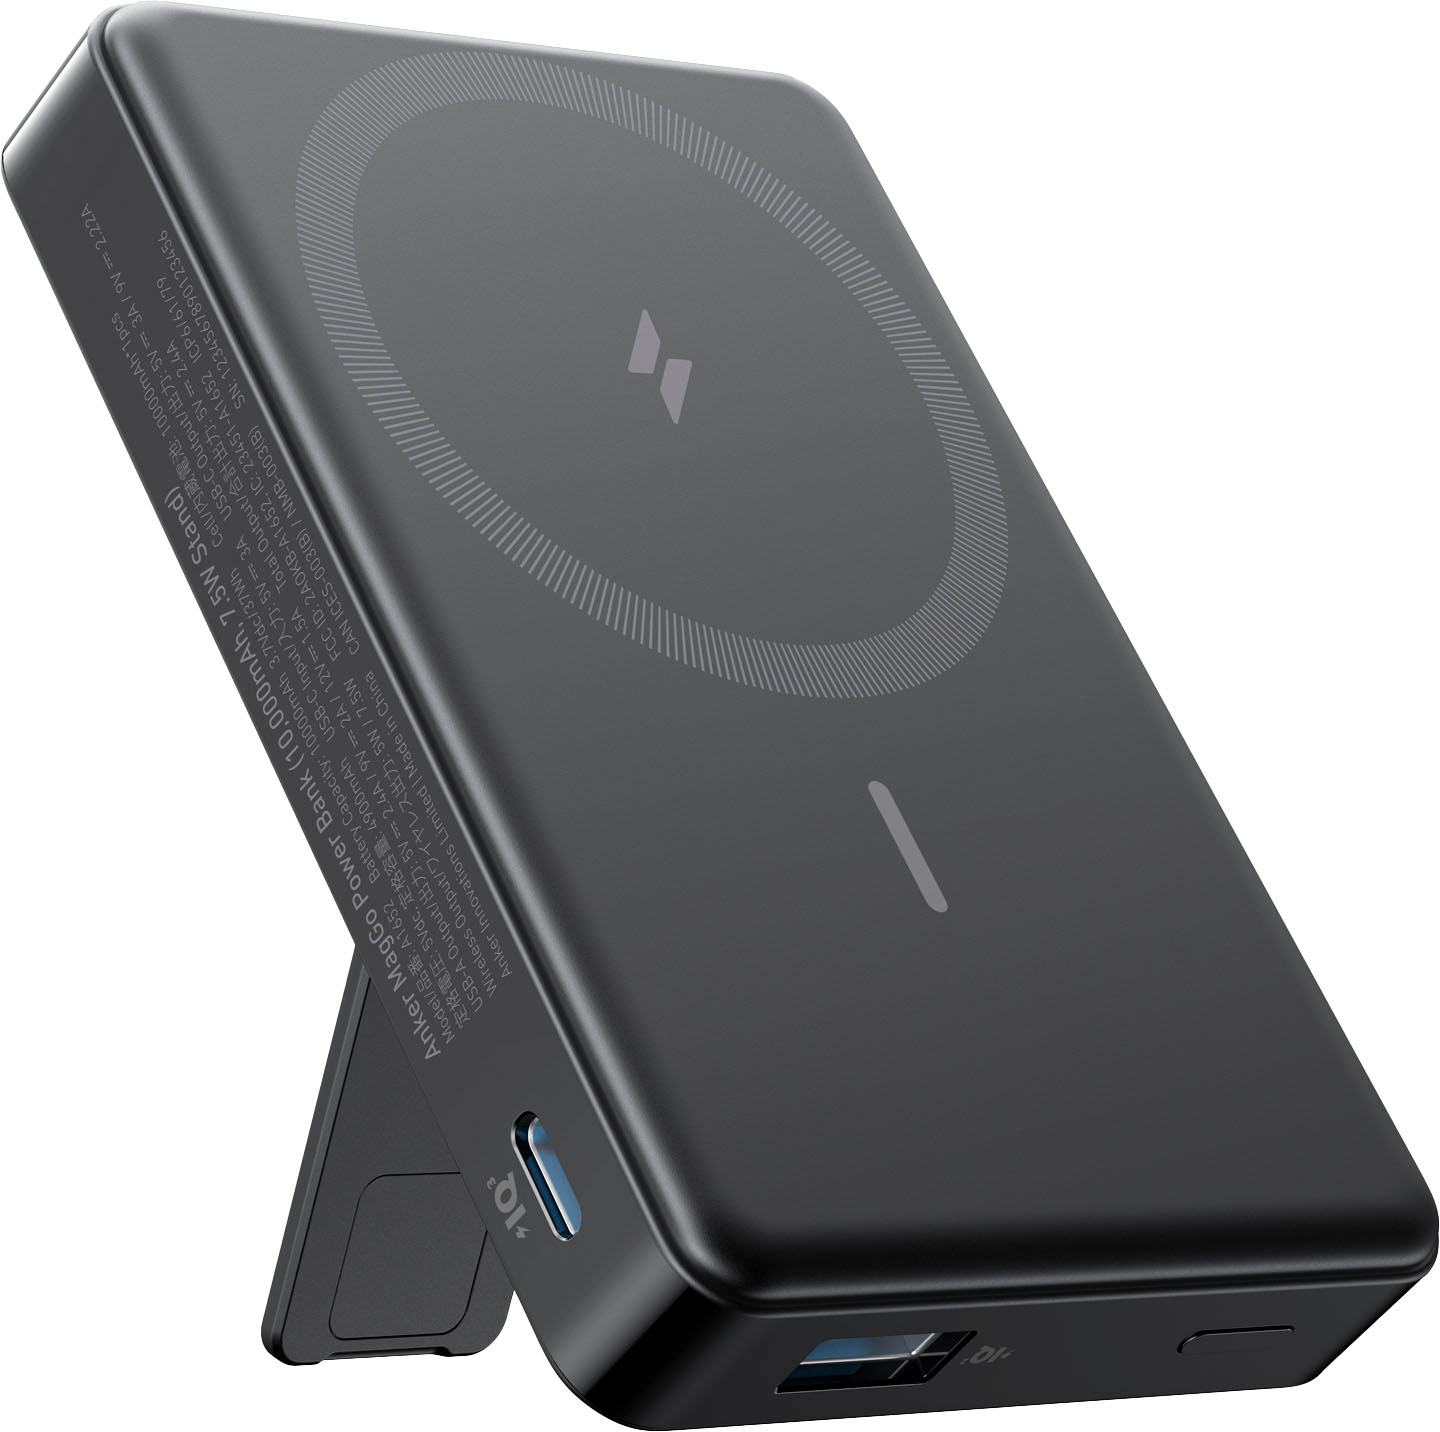 Mophie folding MagSafe iPhone stand $40 - Geeky Gadgets